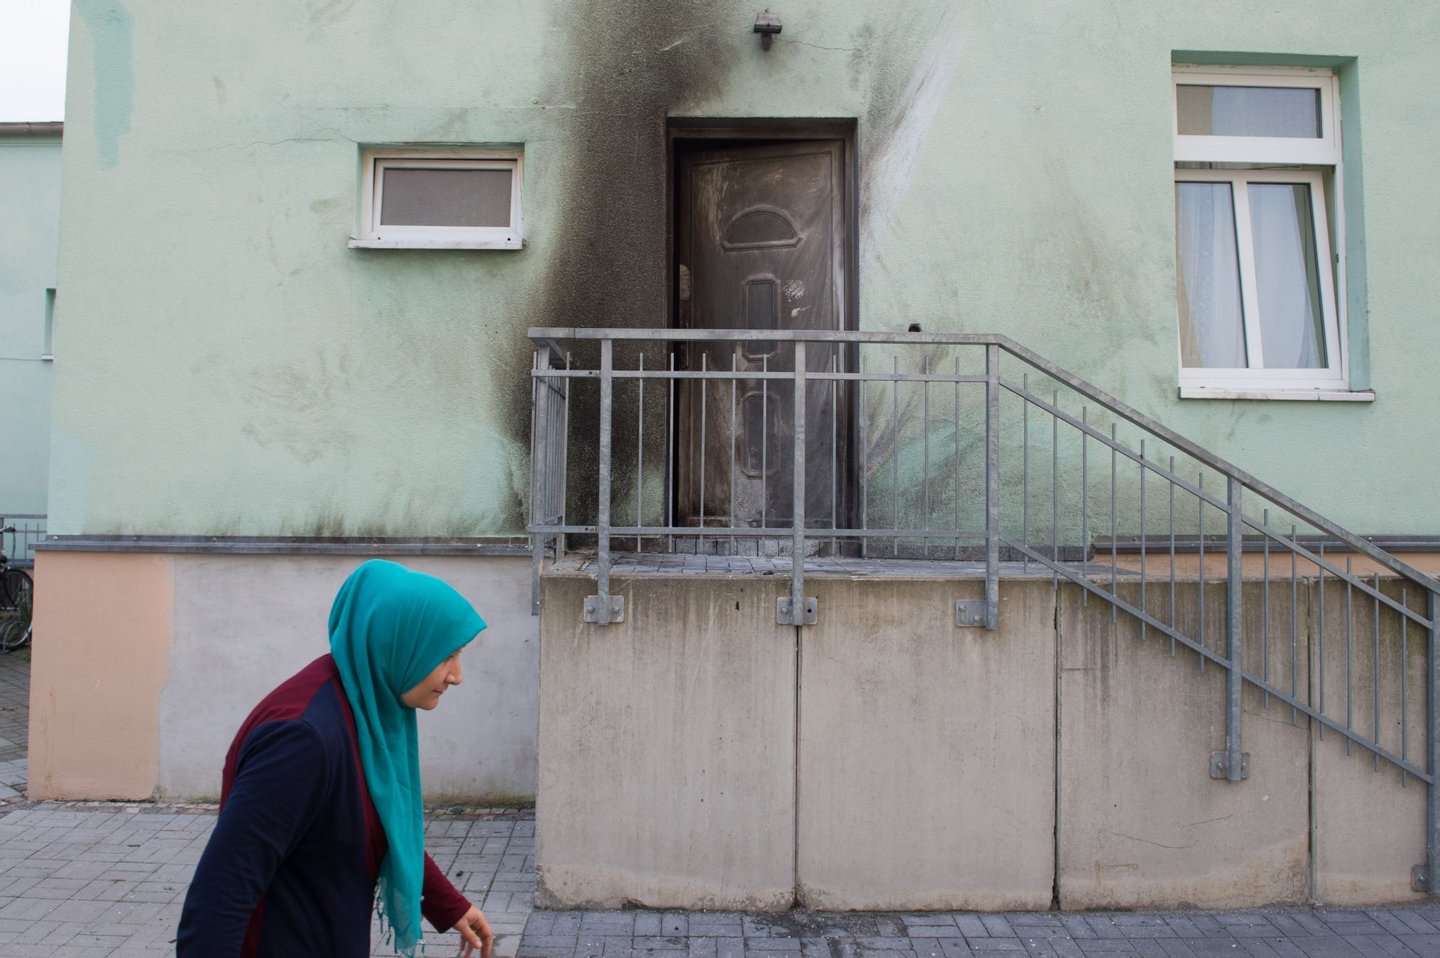 A woman wearing a headscarf walks past the entrance to the Fatih Camii Mosque in Dresden, eastern Germany, where traces of smoke can be seen after a bomb attack. Bomb attacks hit a mosque and a congress centre in the eastern German city of Dresden, police said, addding that they suspected a xenophobic and nationalist motive. No-one was injured in the twin explosives attacks late Monday, September 26, 2016 in the city that has become a hotspot for far-right protests amid Germany's huge migrant influx. / AFP / dpa / Sebastian Kahnert / Germany OUT (Photo credit should read SEBASTIAN KAHNERT/AFP/Getty Images)